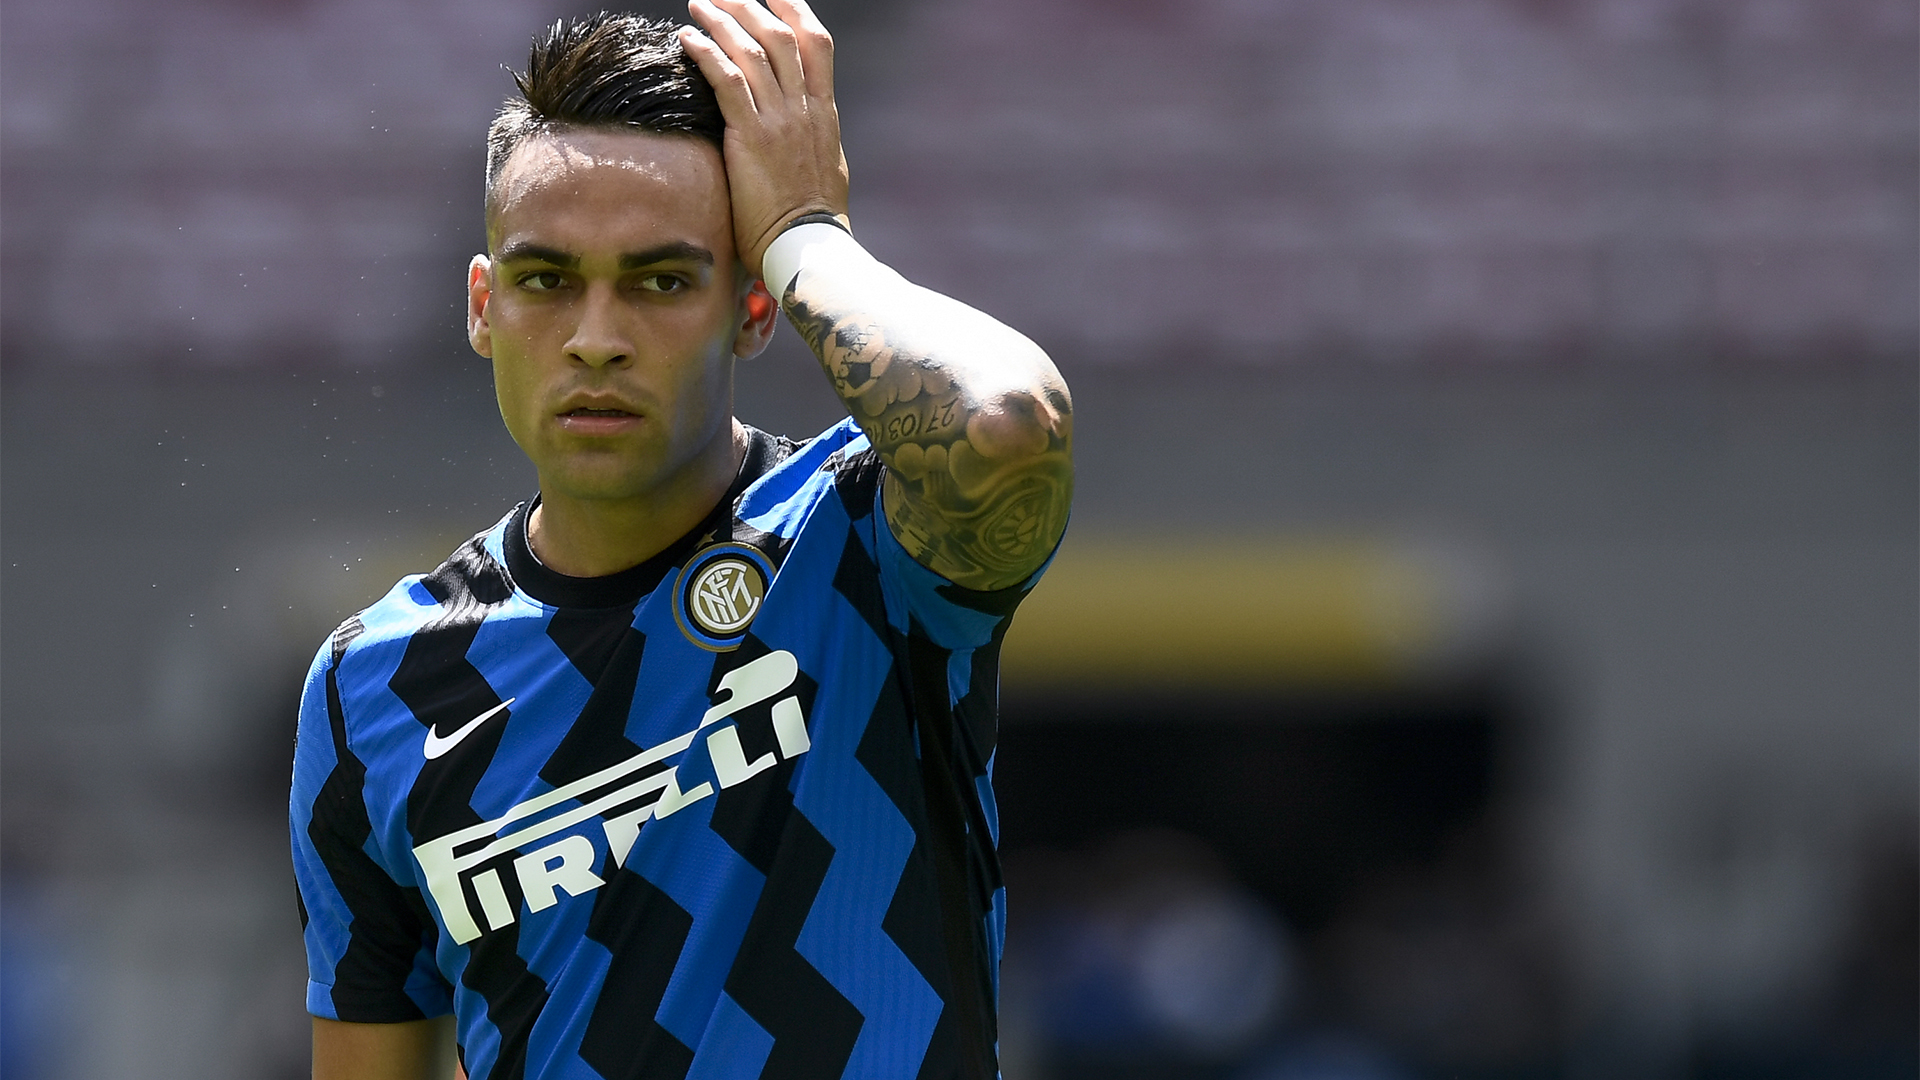 Alejandro Camano, the representative of Lautaro Martinez, suggested that he fielded multiple offers this summer and should be rewarded.